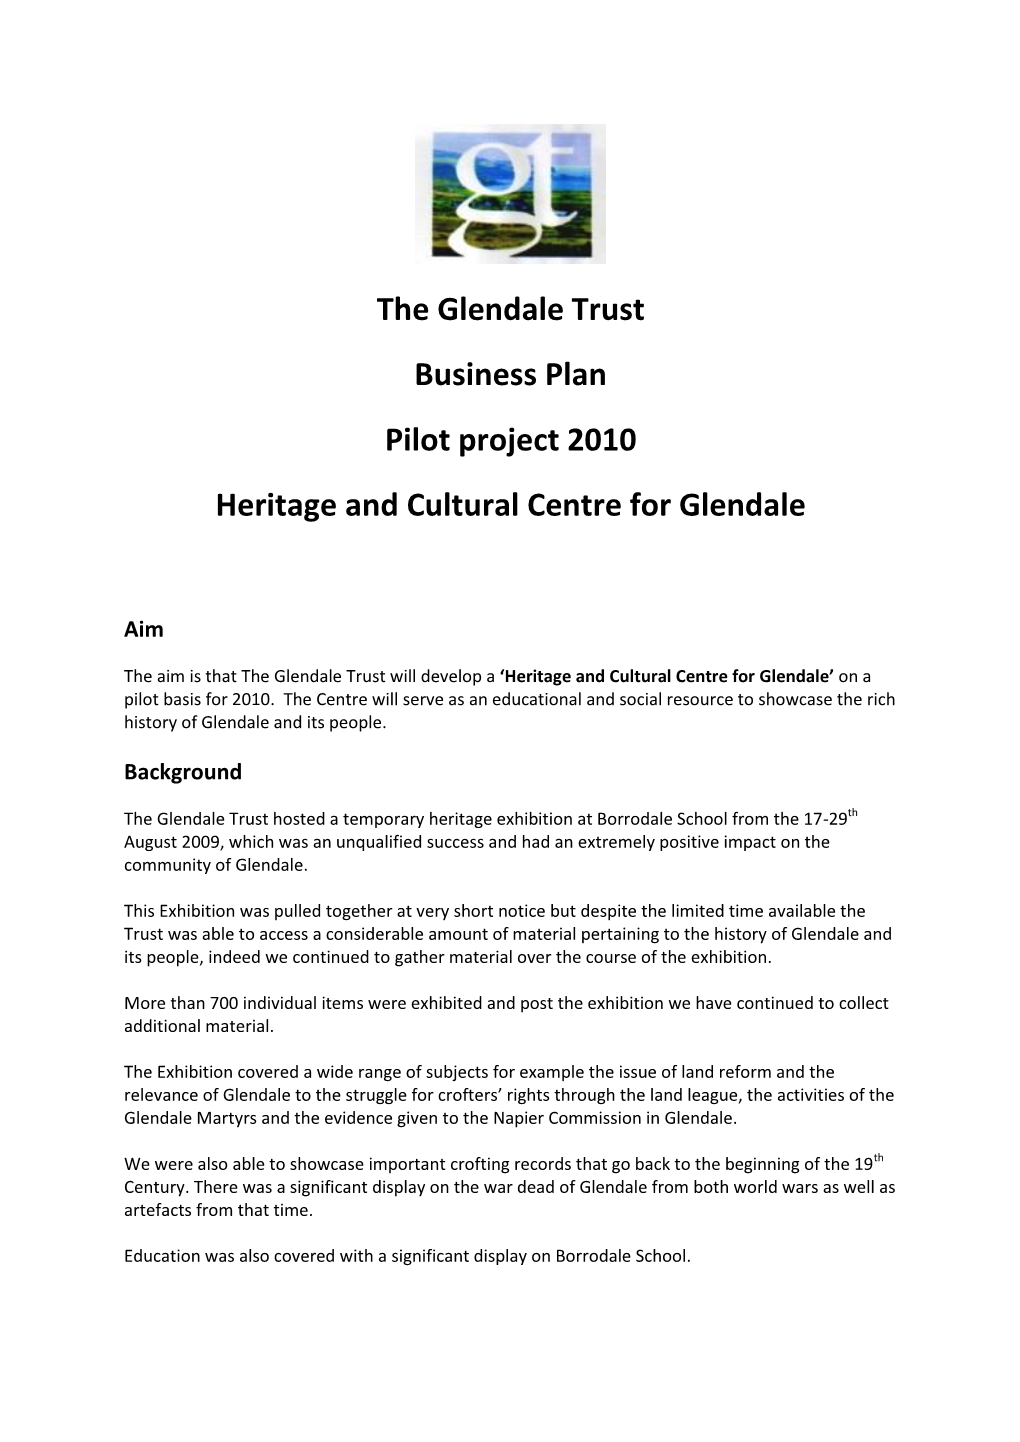 The Glendale Trust Business Plan Pilot Project 2010 Heritage and Cultural Centre for Glendale